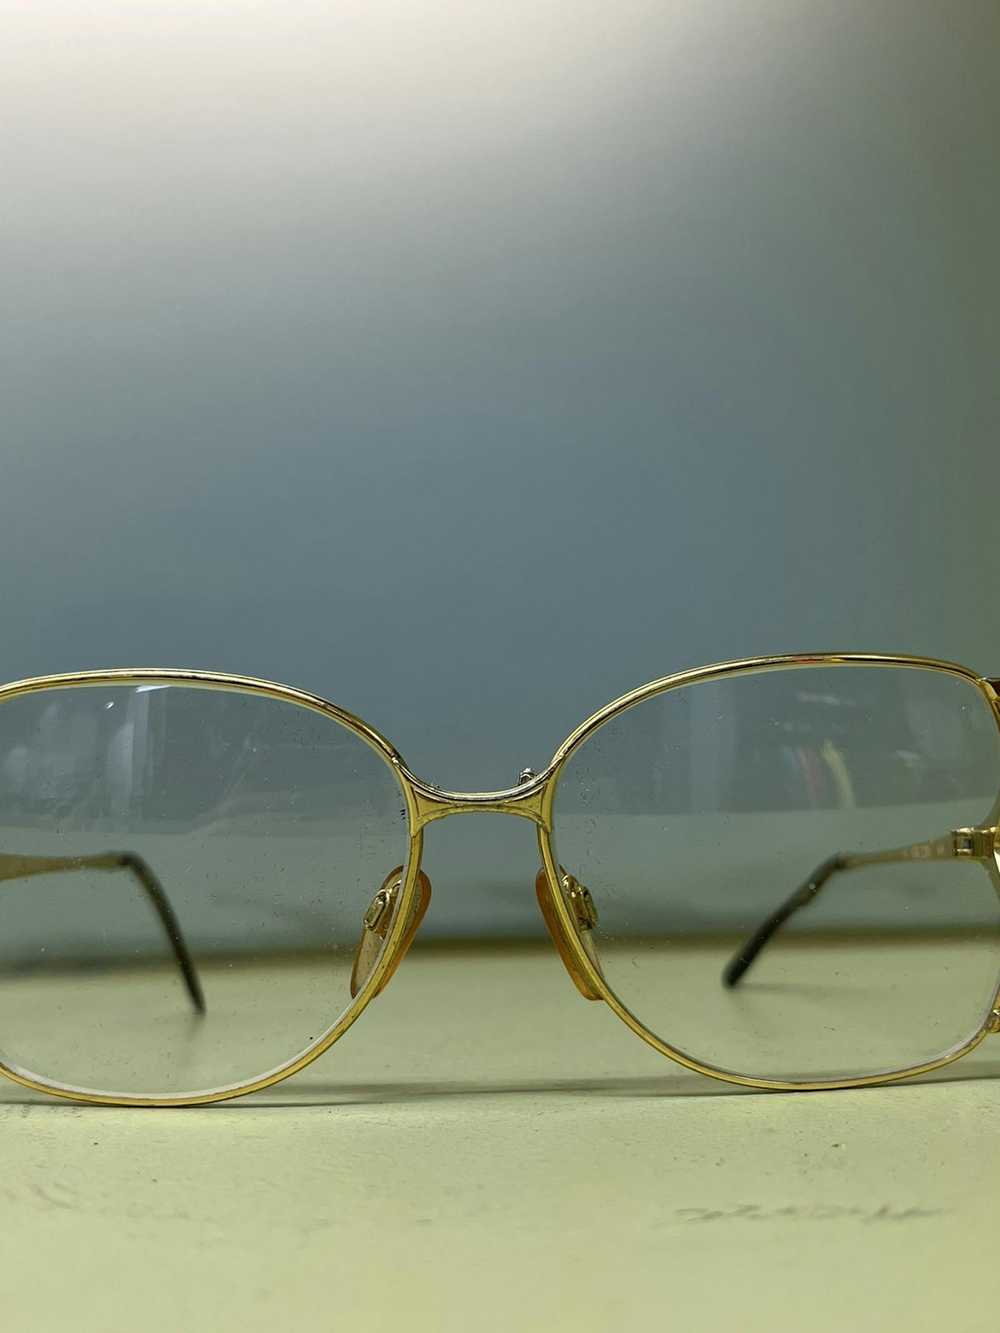 Gucci Gucci GG220 Vintage Oversized Glasses - image 9